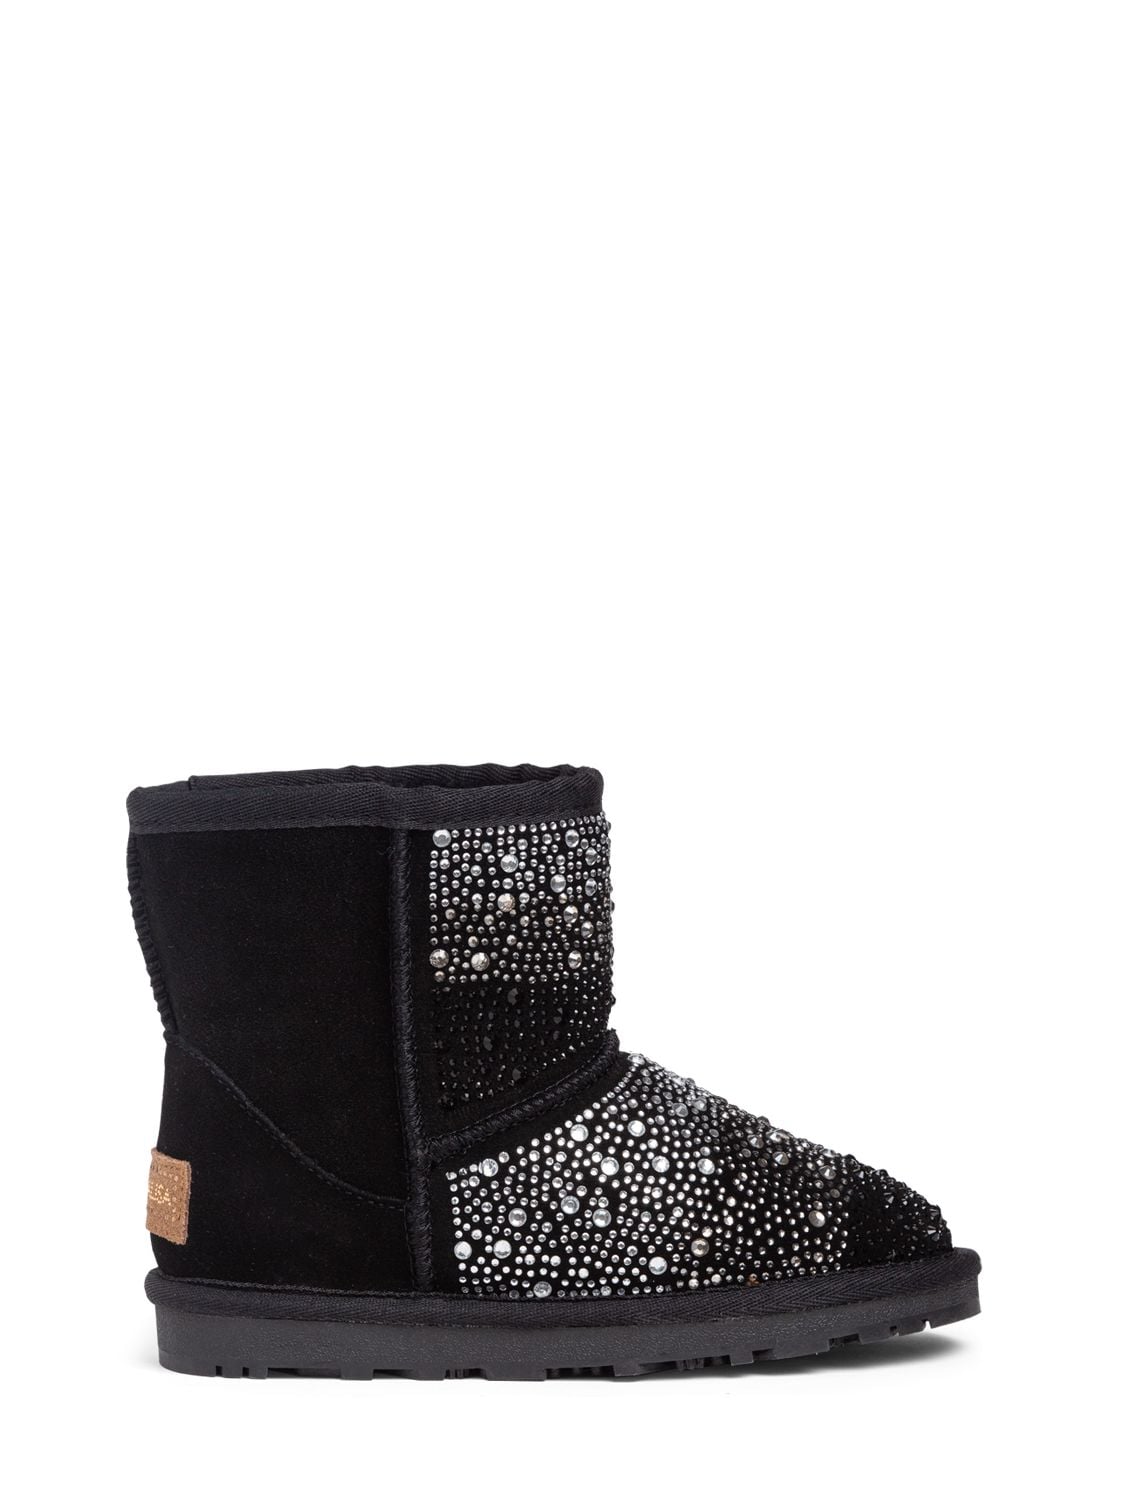 Image of Embellished Boots W/ Faux Fur